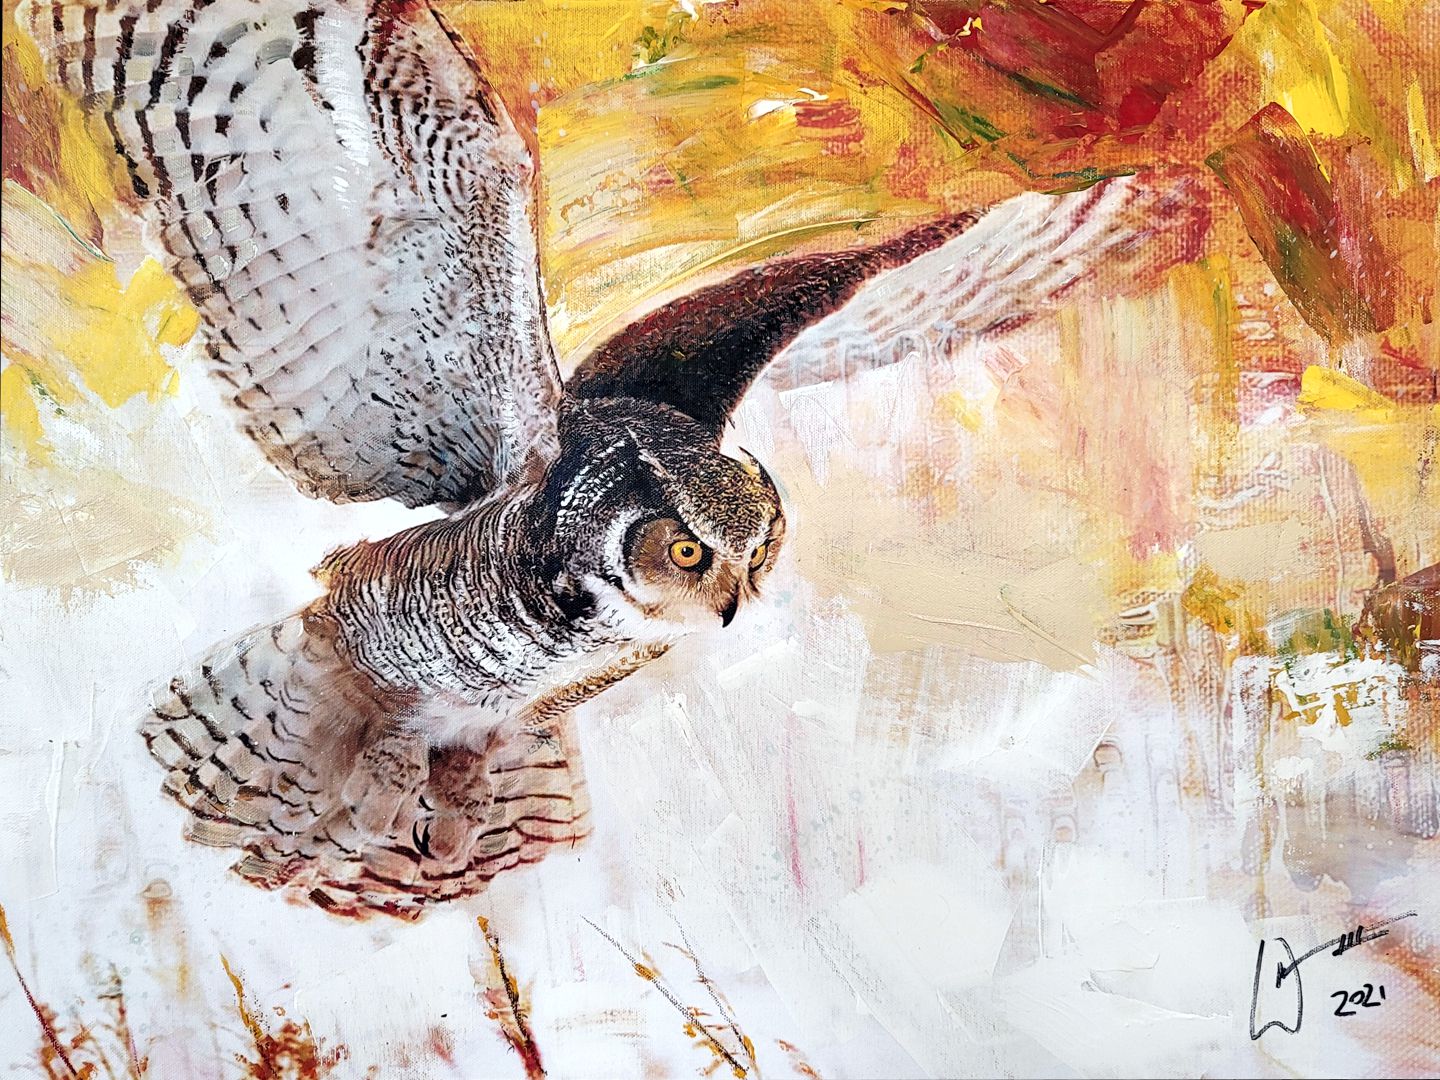 Barred Owl painting by artist, William III